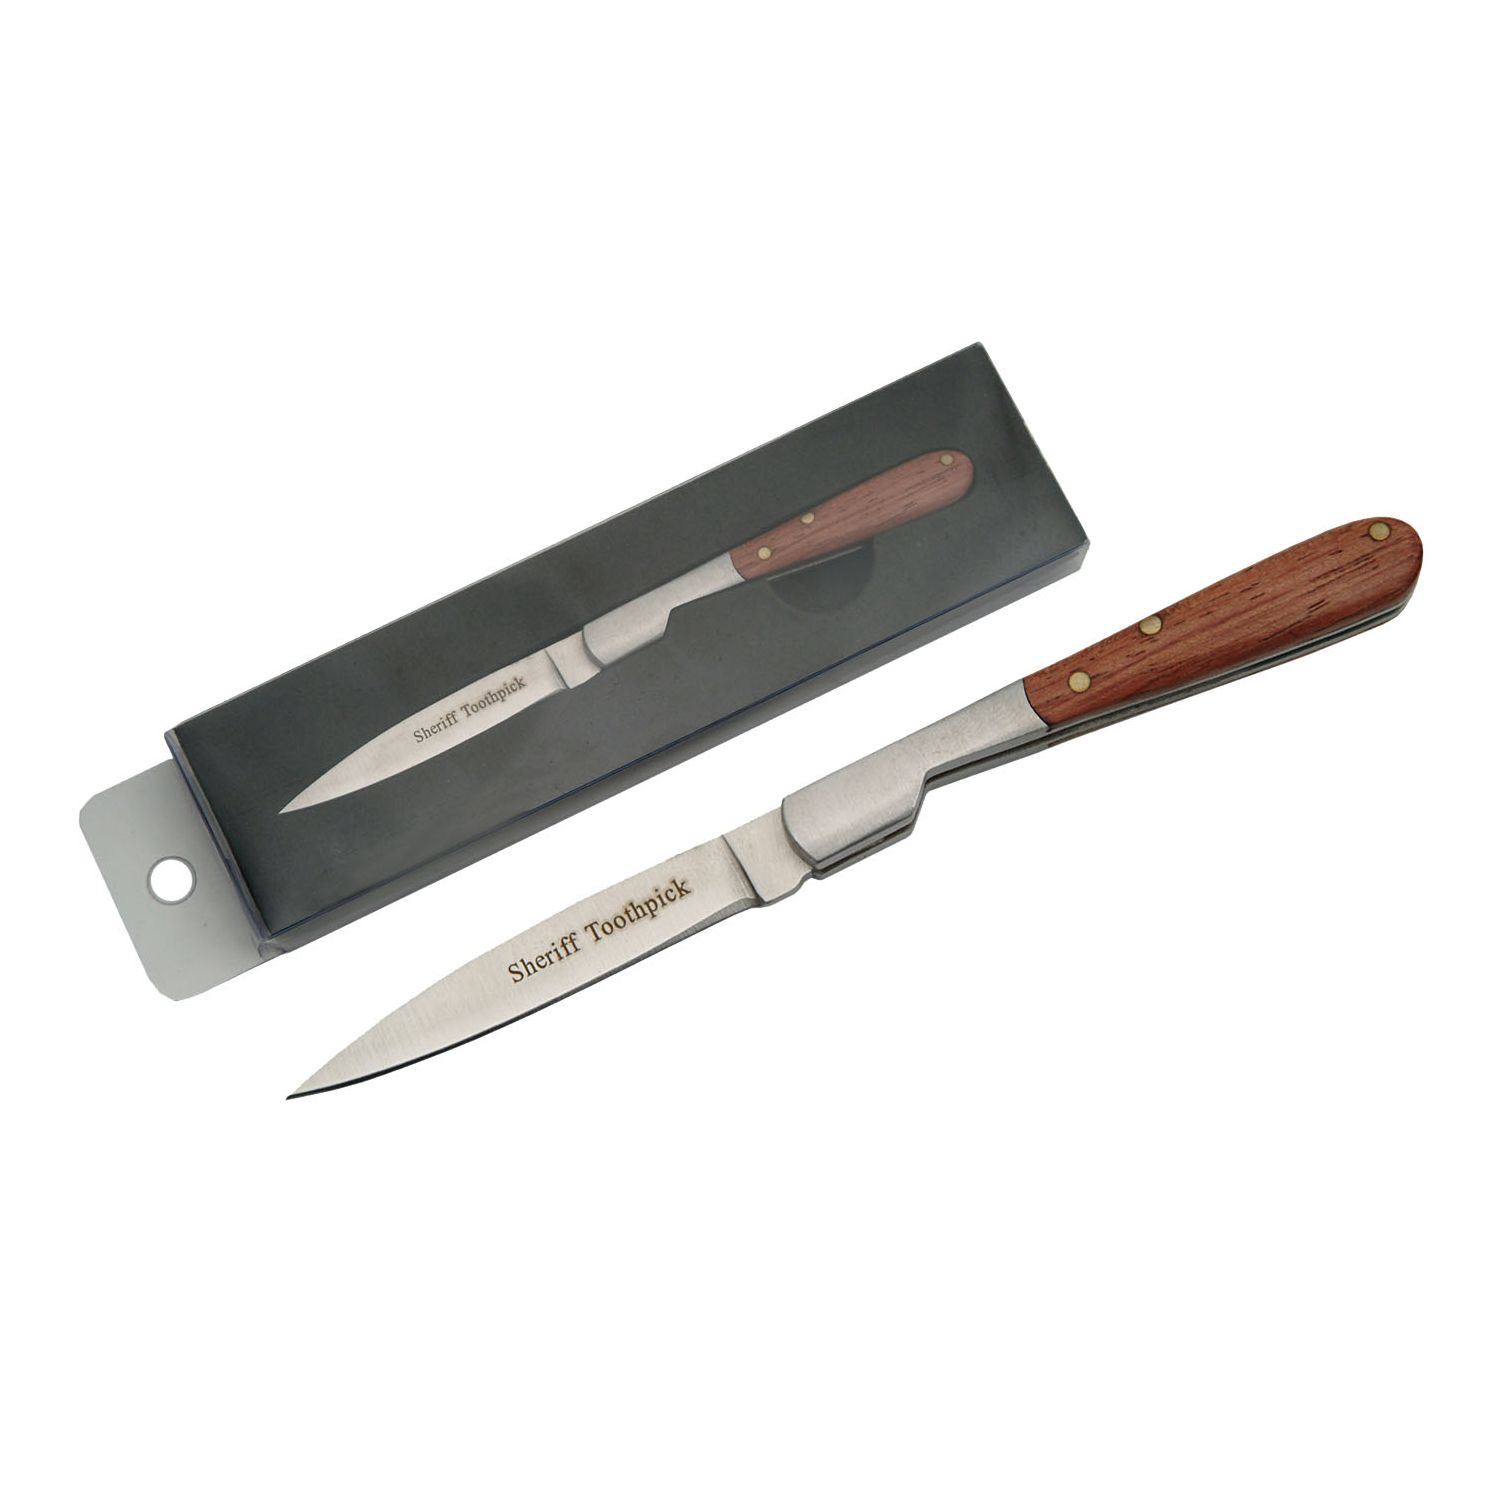 Folding Knife 3in. Closed 'Sheriff Toothpick' Stainless Steel Blade Wood Handle